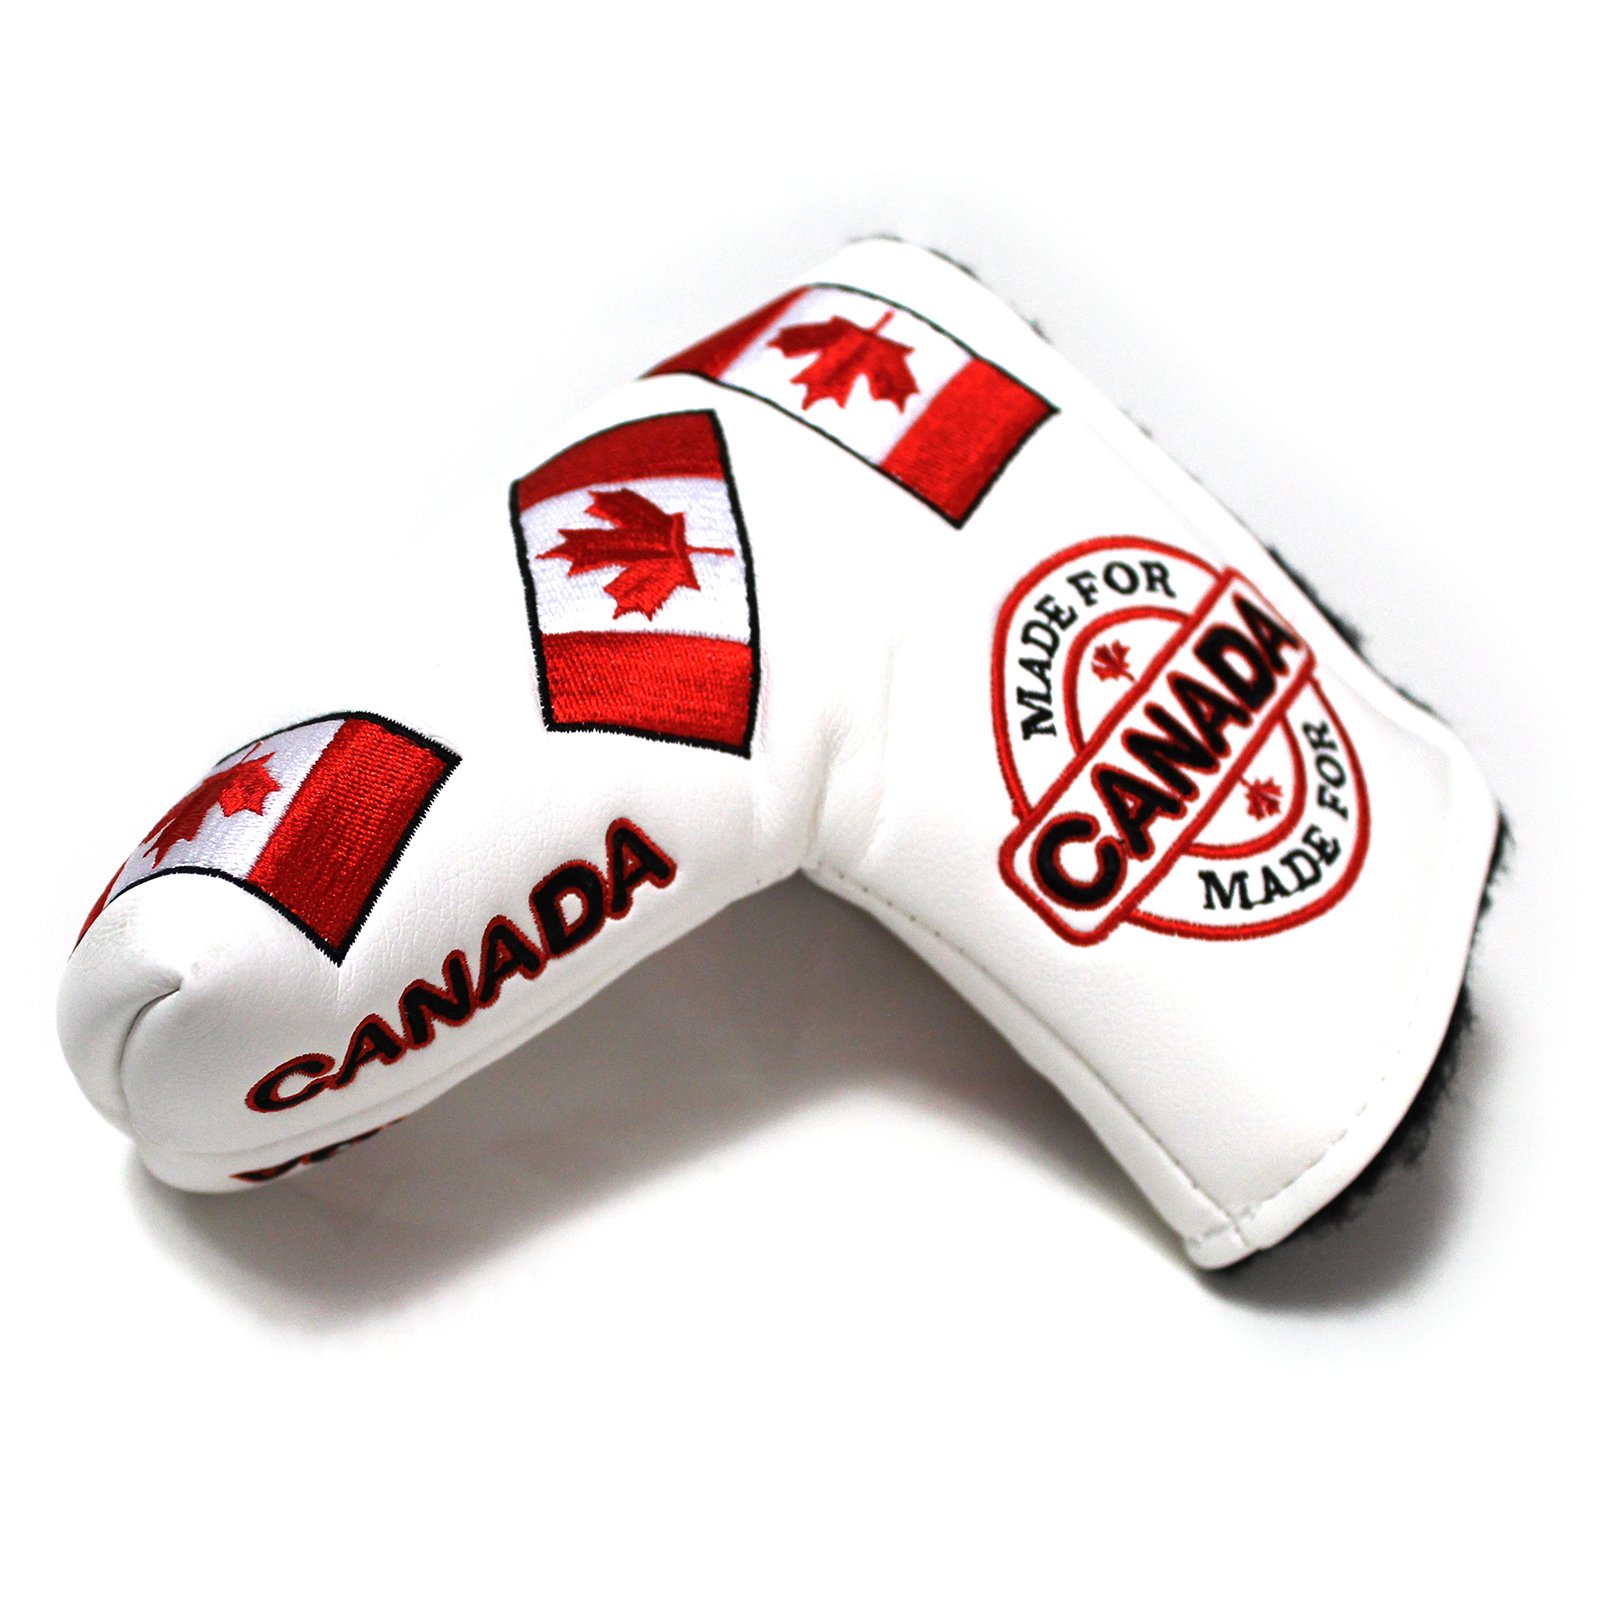 CNC GOLF Canada Putter Cover Magnetic Headcover for Scotty Cameron Taylormade Odyssey Blade